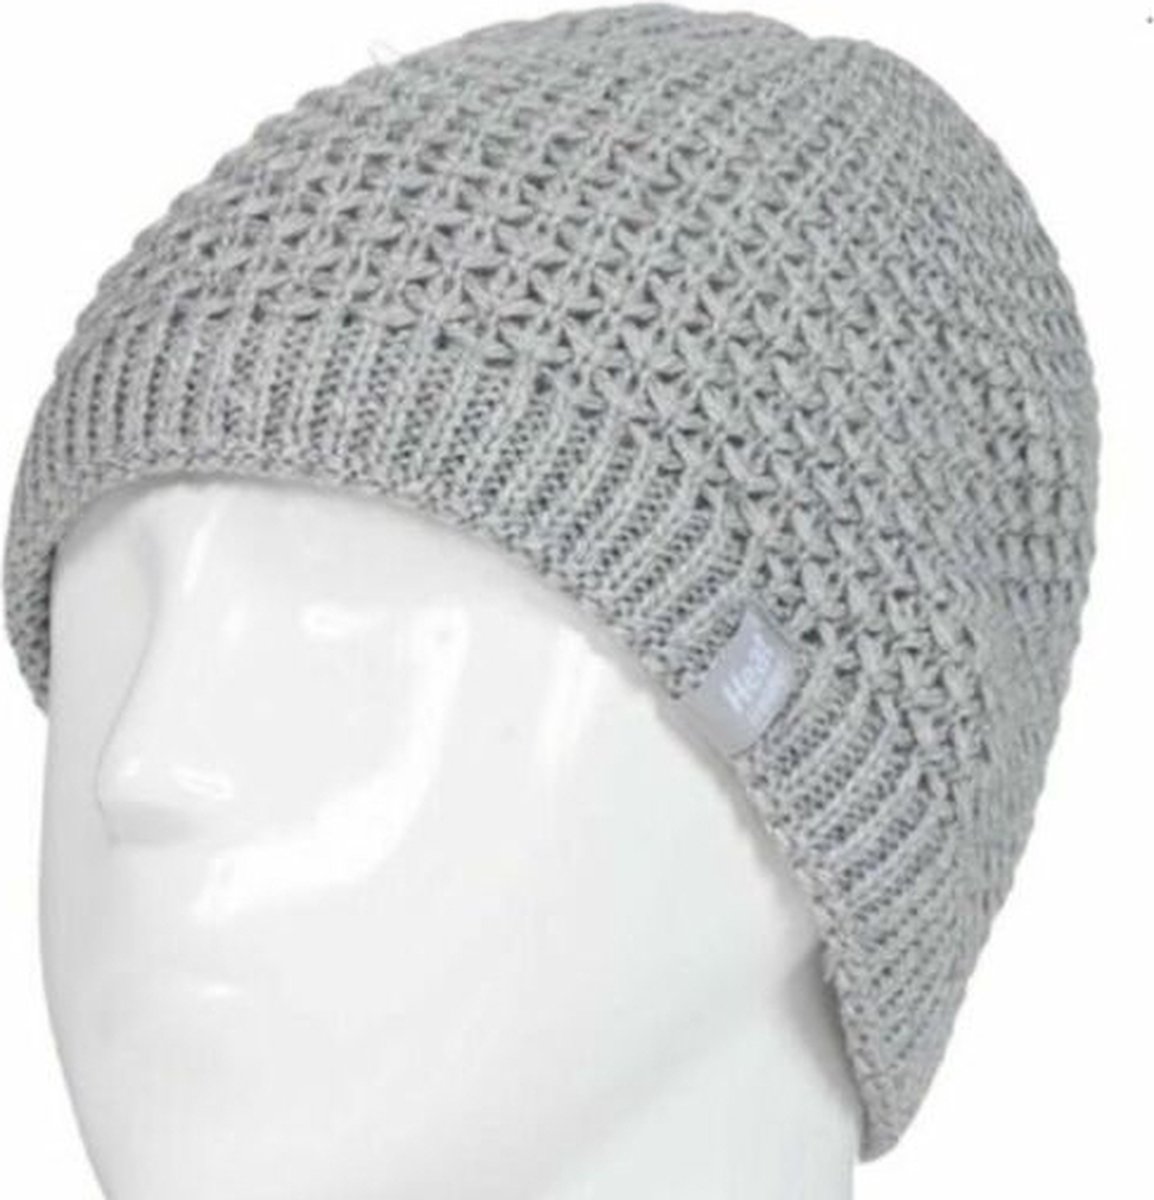 Heat Holders Ladies cable hat nora light grey one size